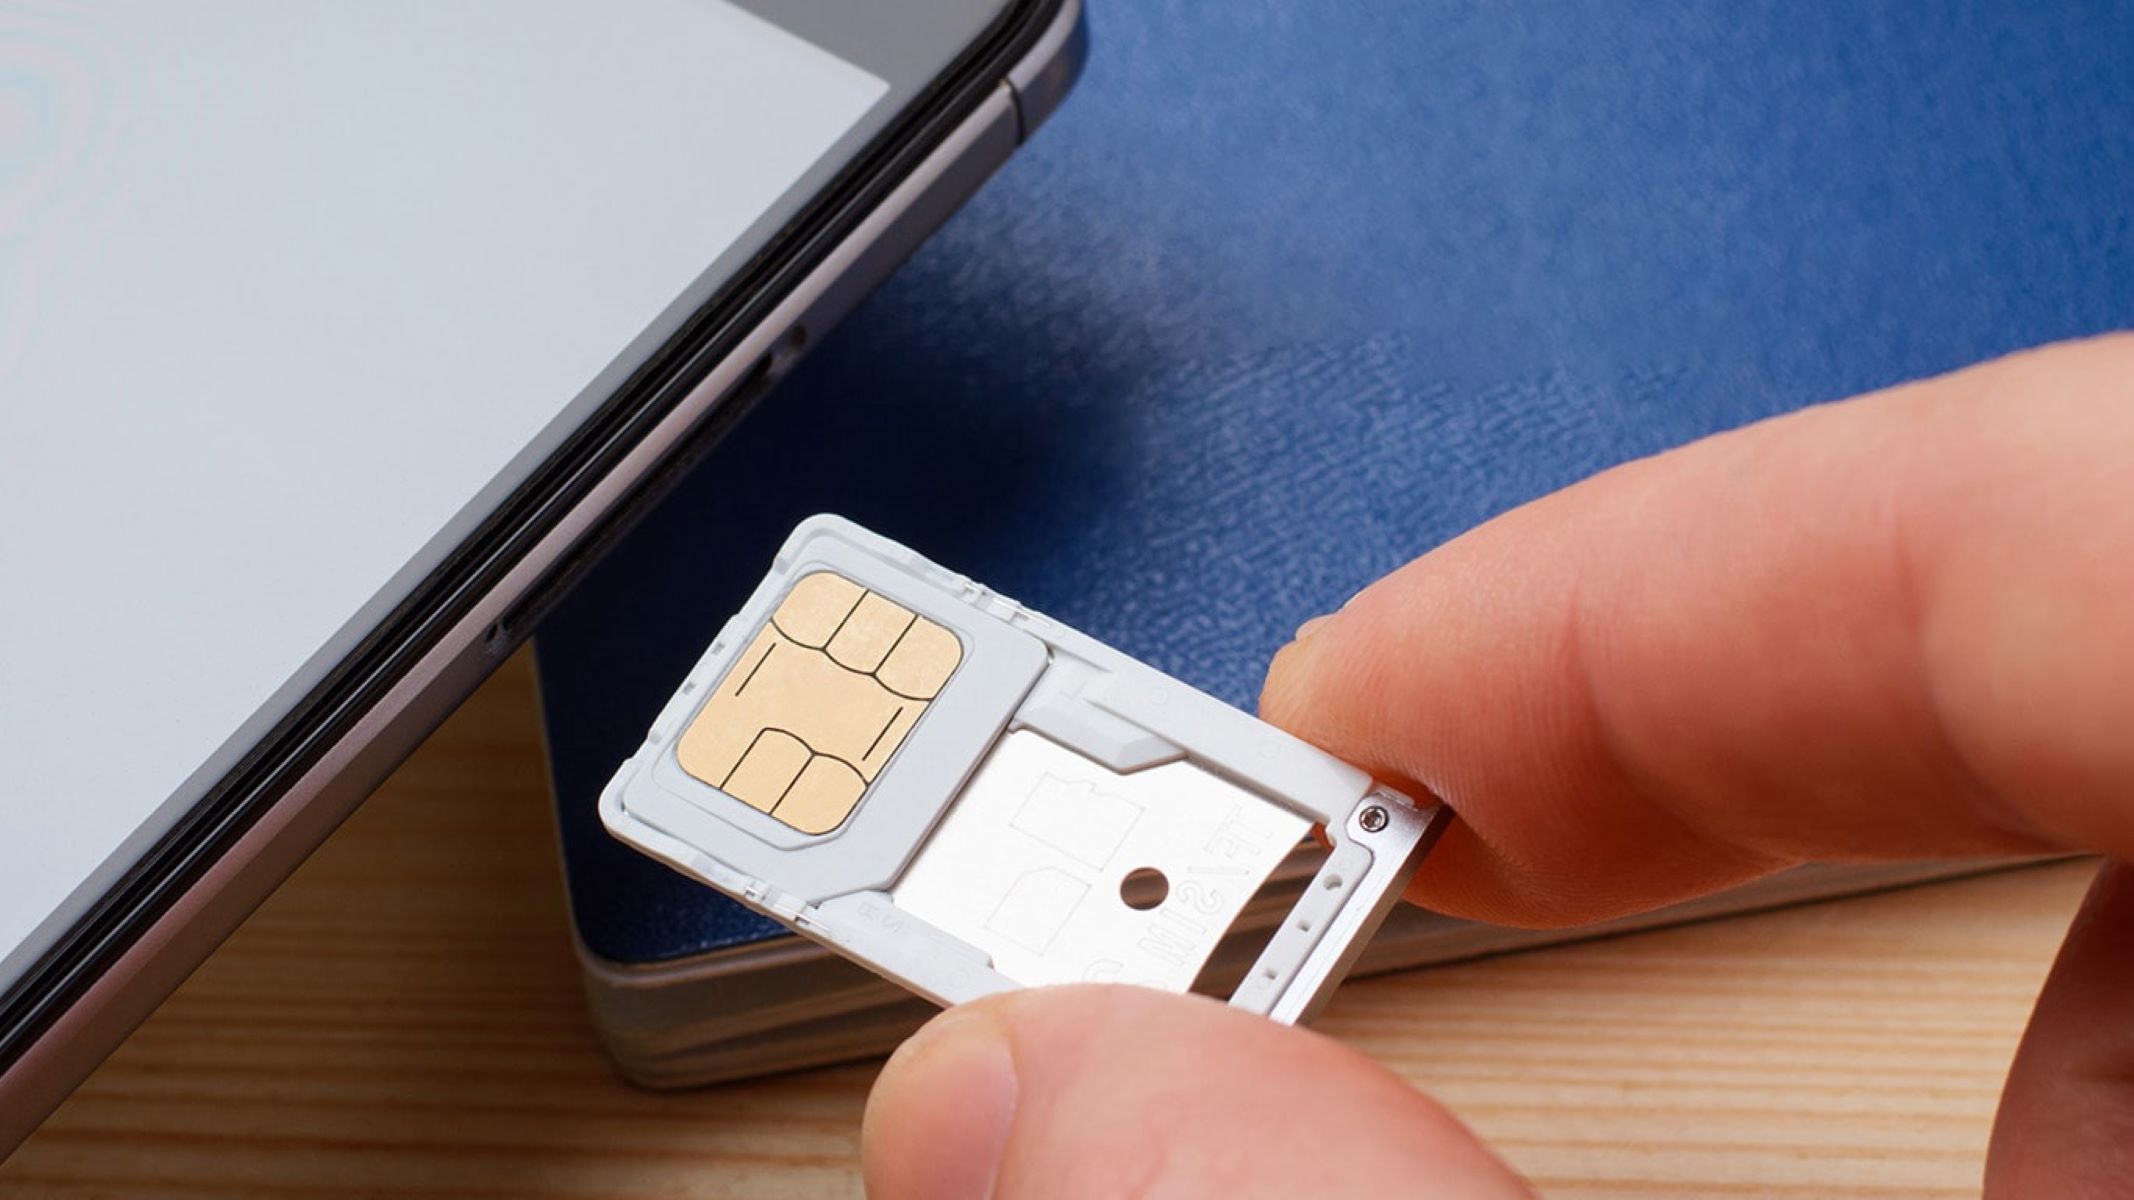 How To Use Assurance Wireless Sim Card In Another Phone